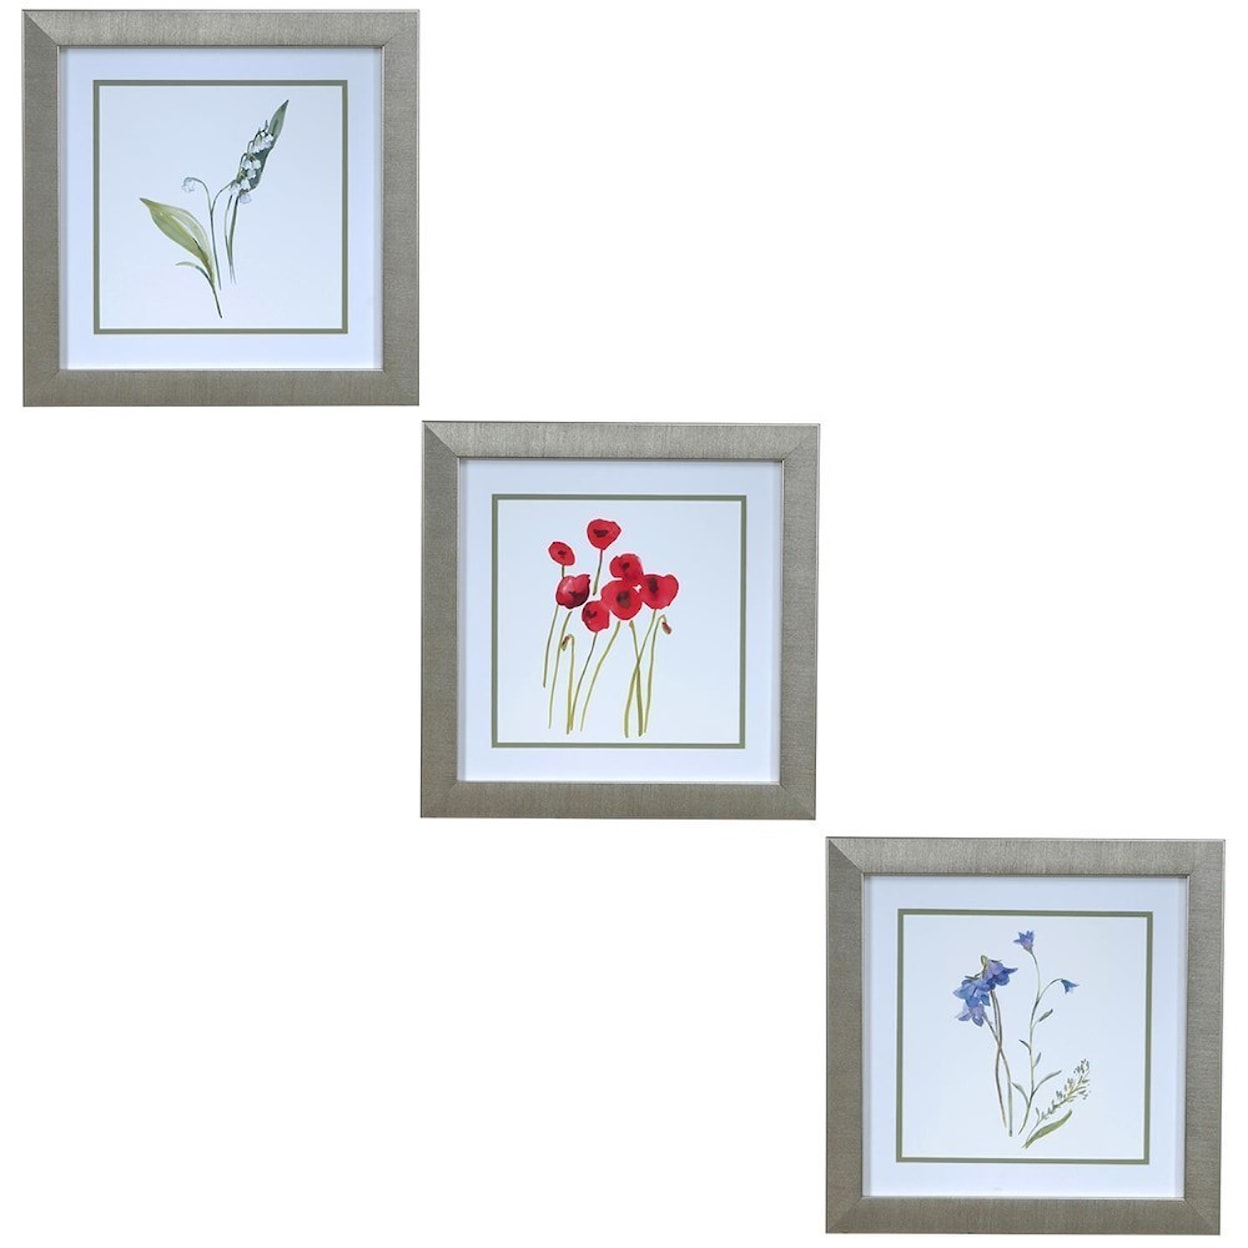 Crestview Collection Prints and Paintings Floral Delights 1,2,3,